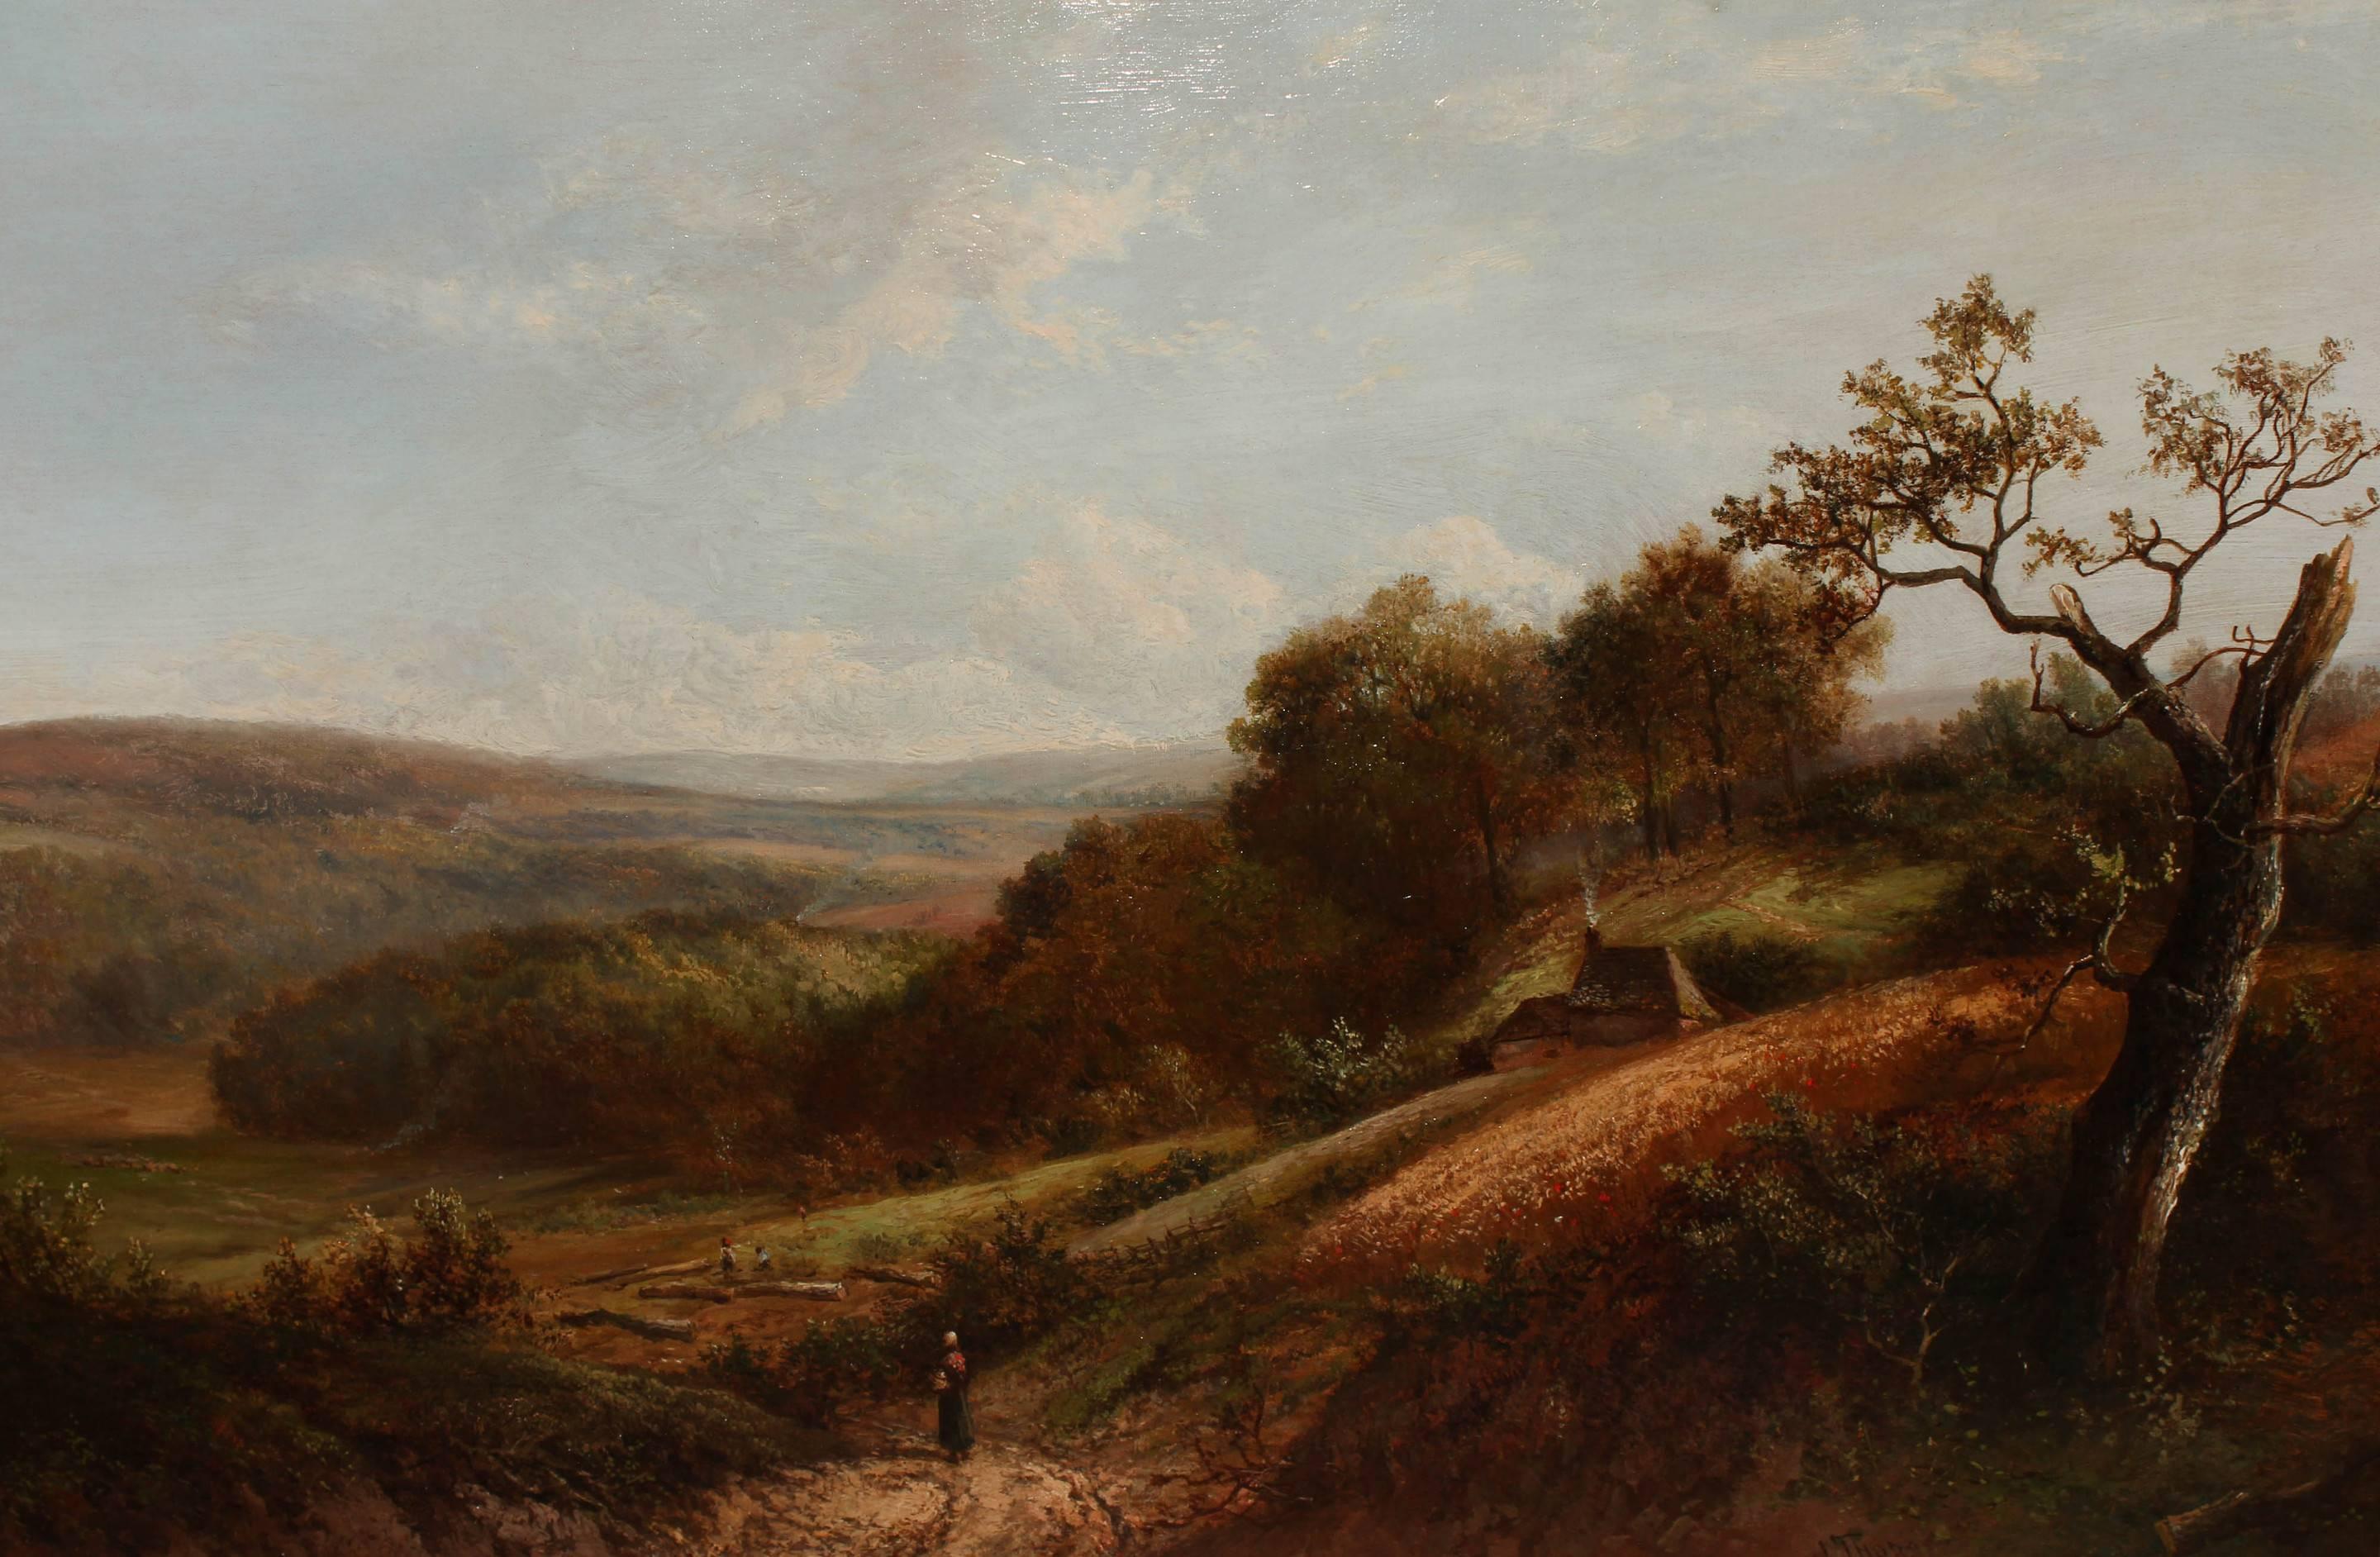 Joseph Thors a popular Midlands painter of rustic landscape. He exhibited at the Royal Academy, Royal Society of British Artists and Royal Society of Birmingham Artists. Possibly the Vale of Evesham. Oil on canvas, 20 x 30 inches, signed.

All of